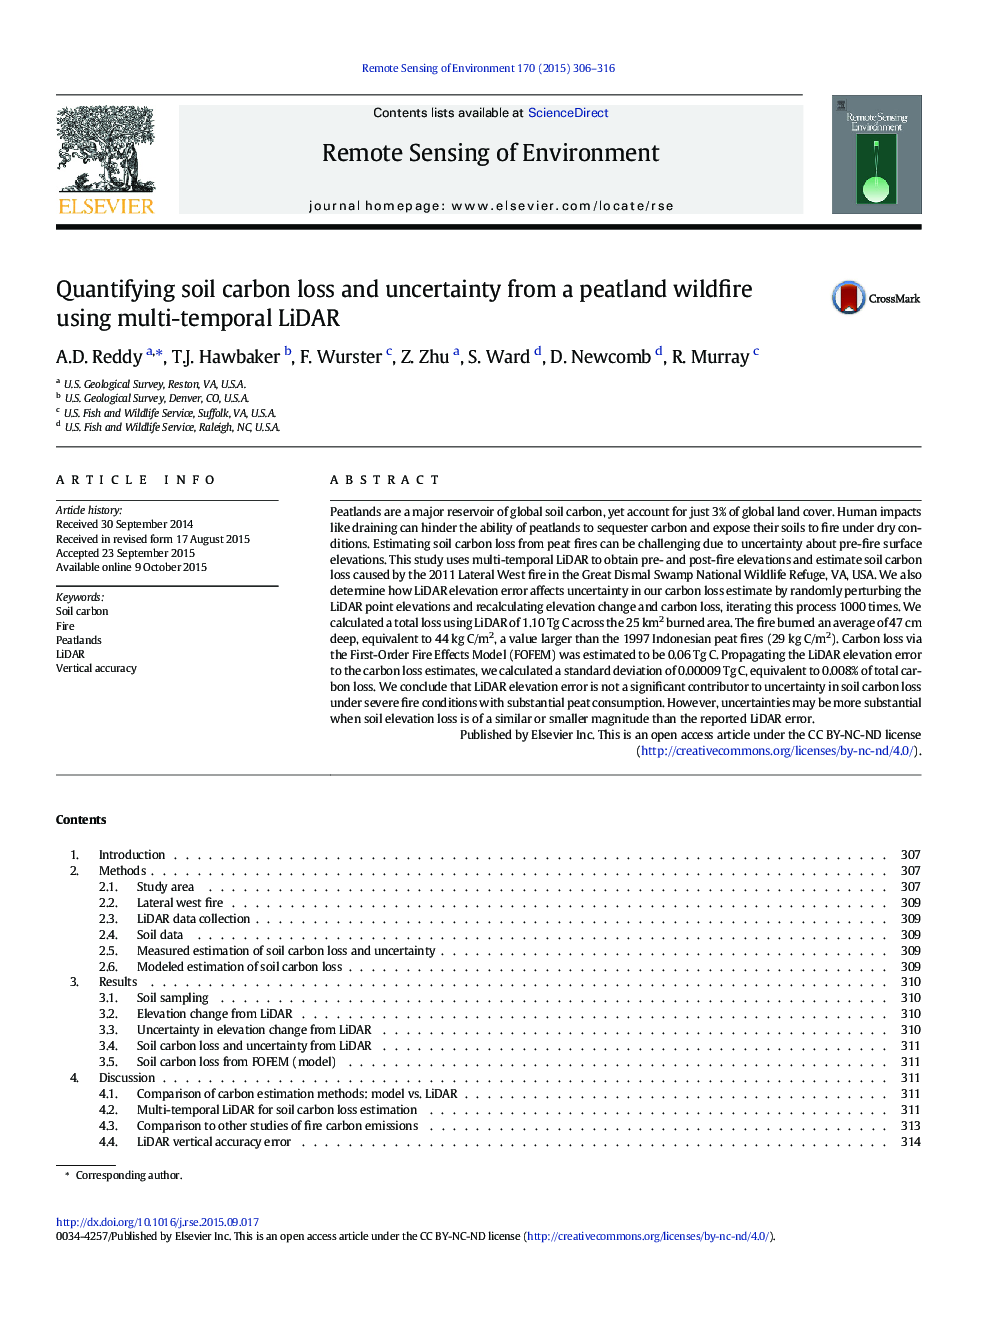 Quantifying soil carbon loss and uncertainty from a peatland wildfire using multi-temporal LiDAR